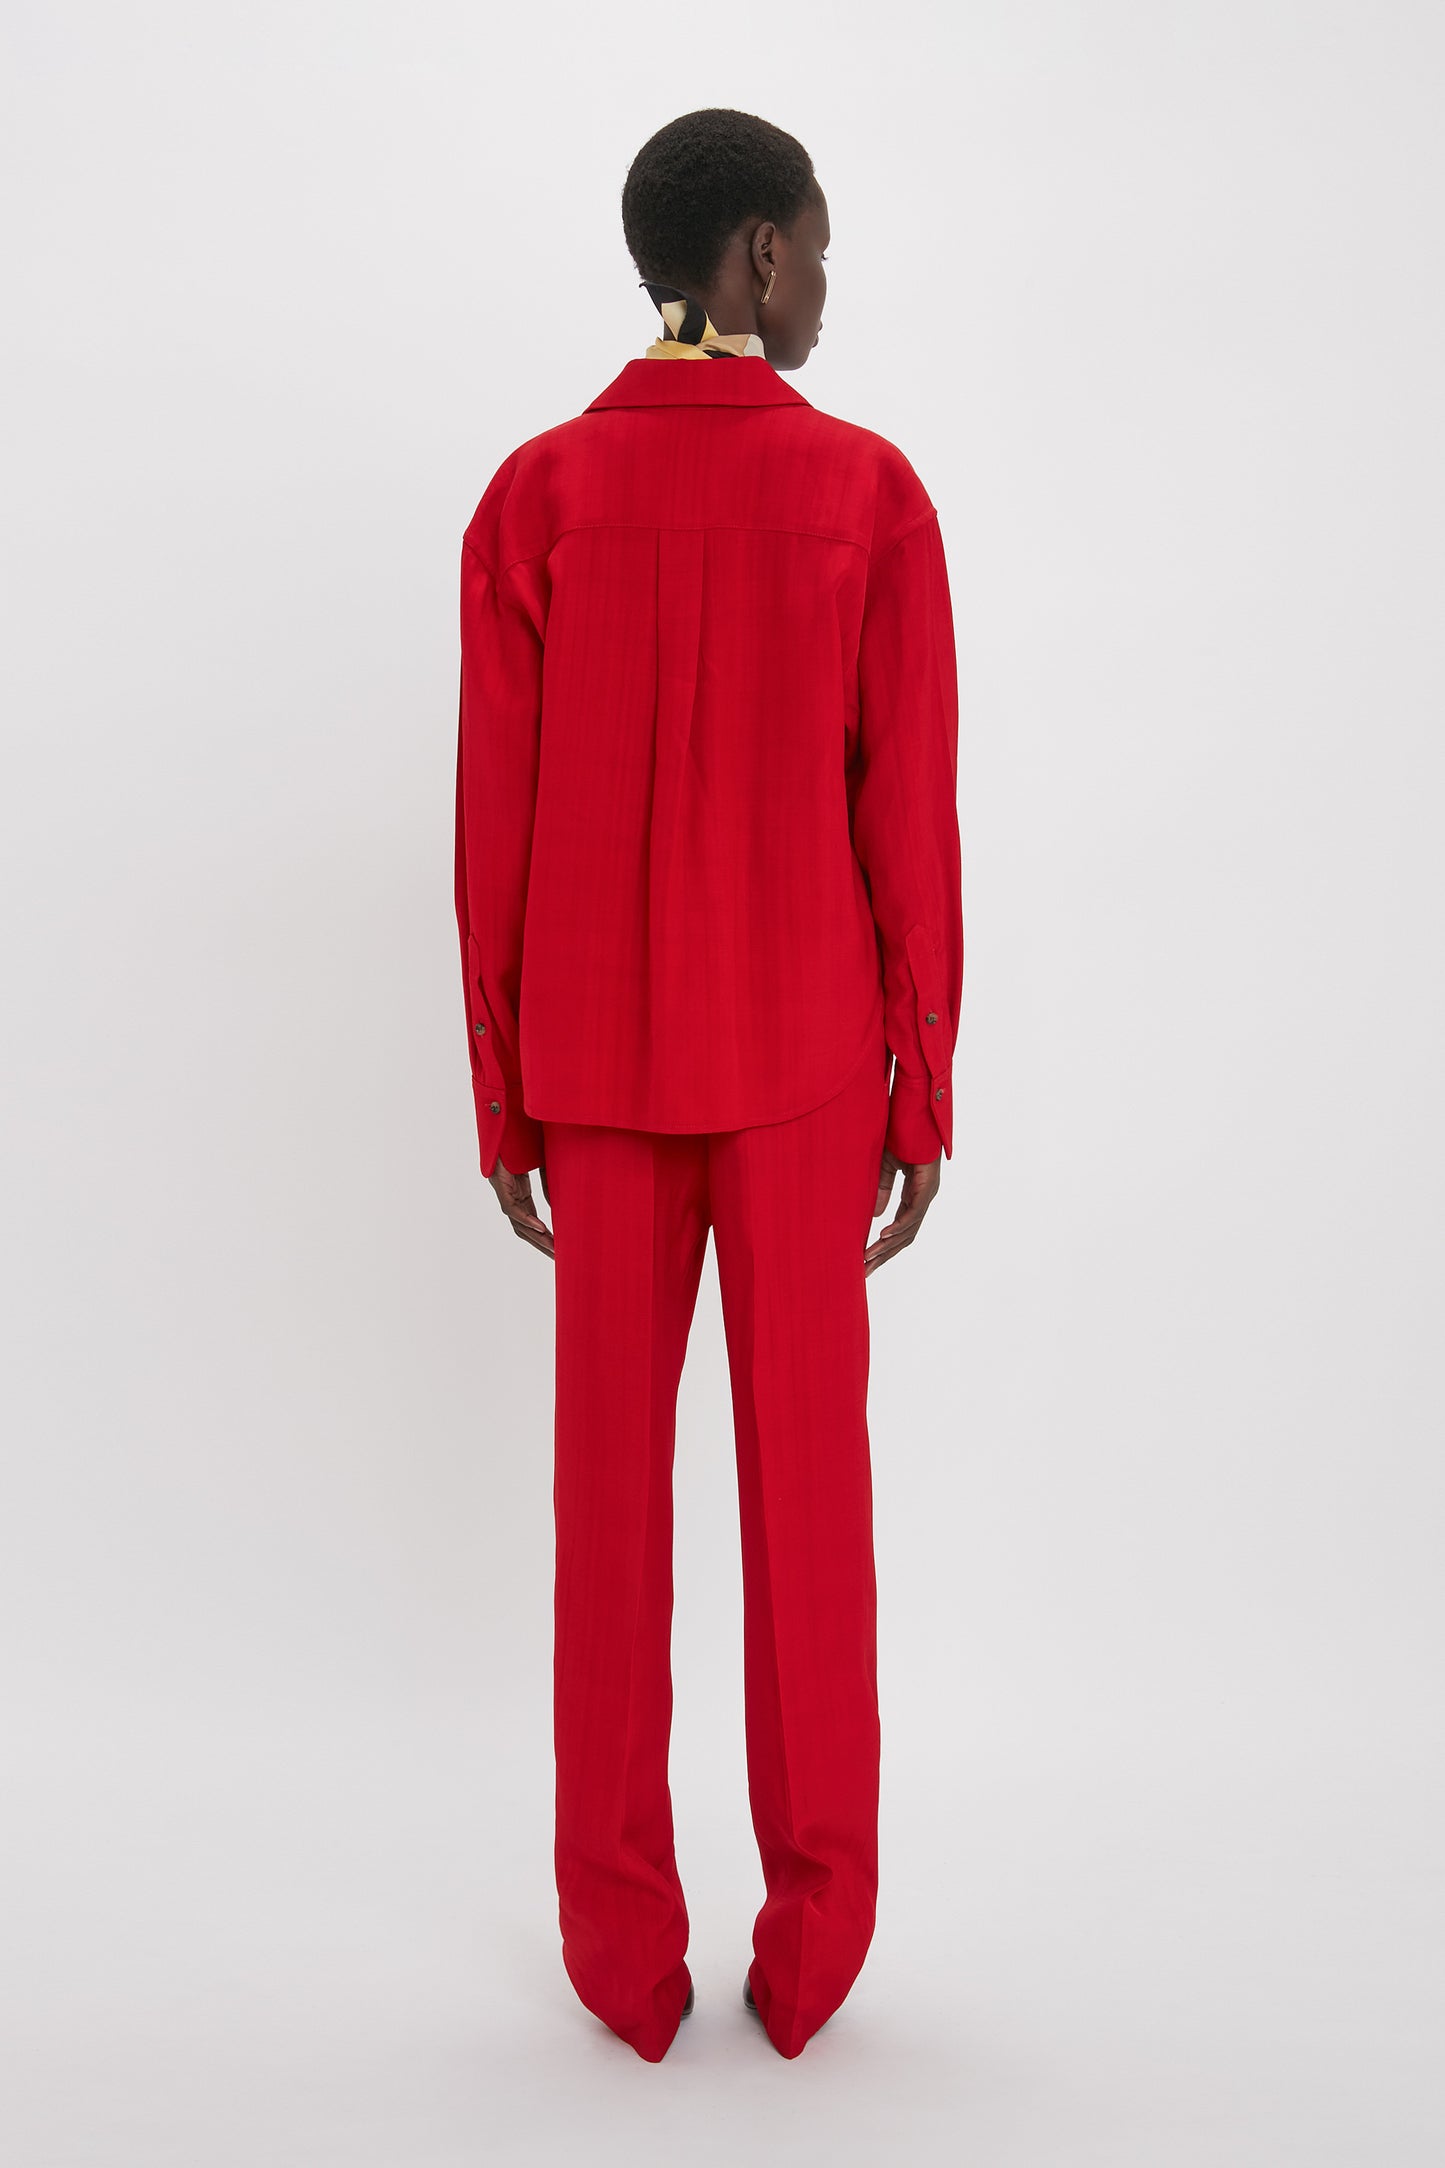 Person standing against a white background, wearing a masculine-inspired red Cropped Long Sleeve Shirt In Carmine by Victoria Beckham and matching pants, viewed from the back.